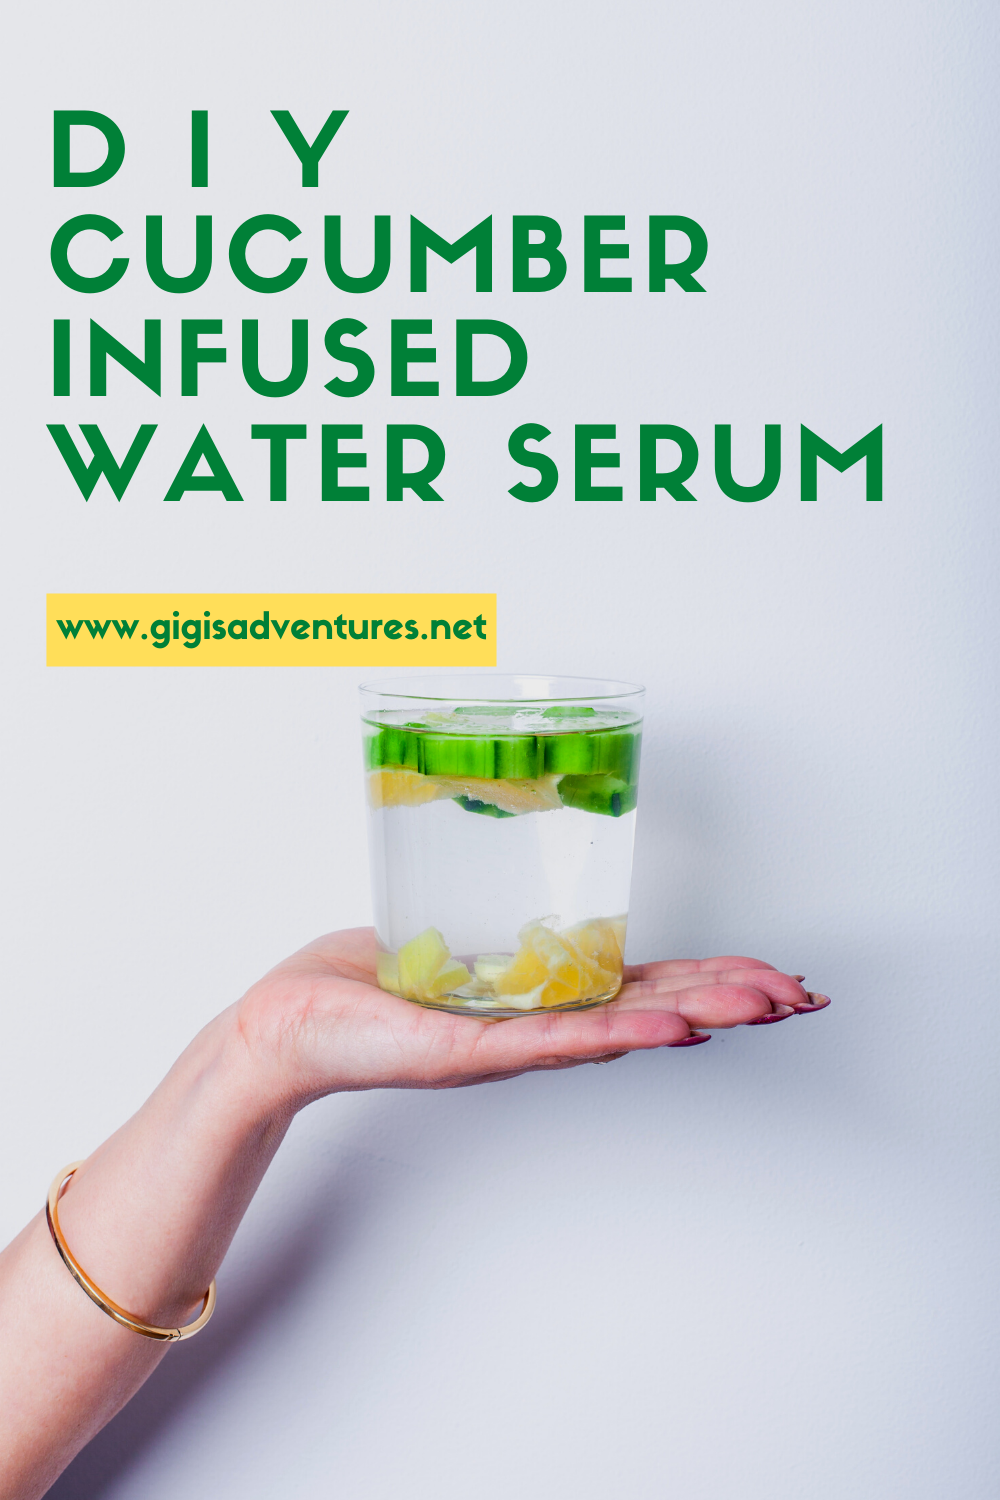 DIY Cucumber Infused Water Facial Serum - for Lifted and Plump Skin